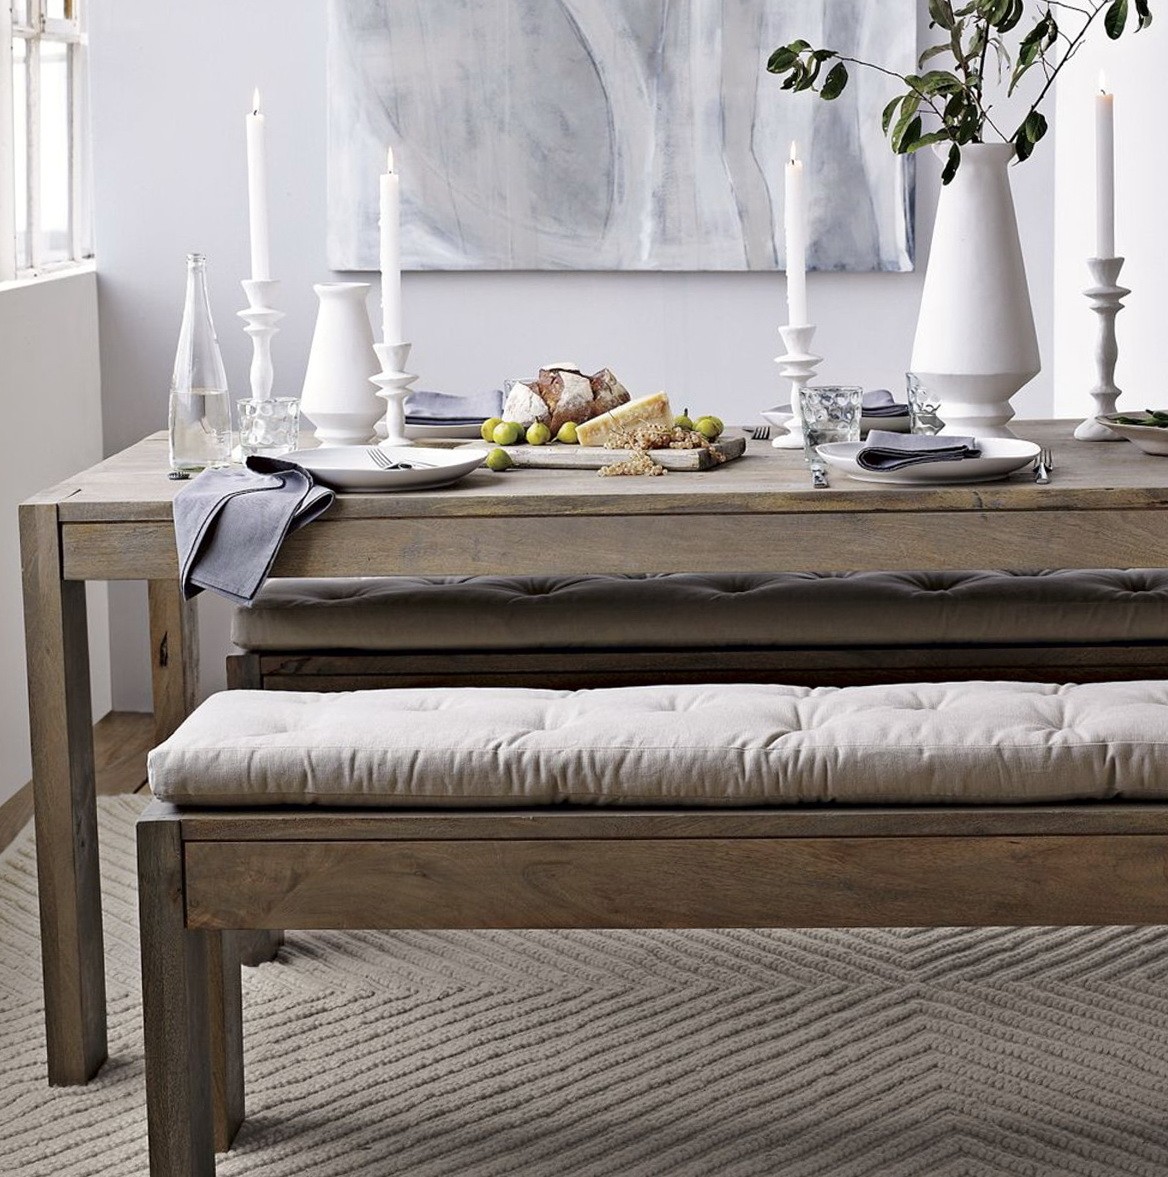 Tufted dining bench cushion home design ideas